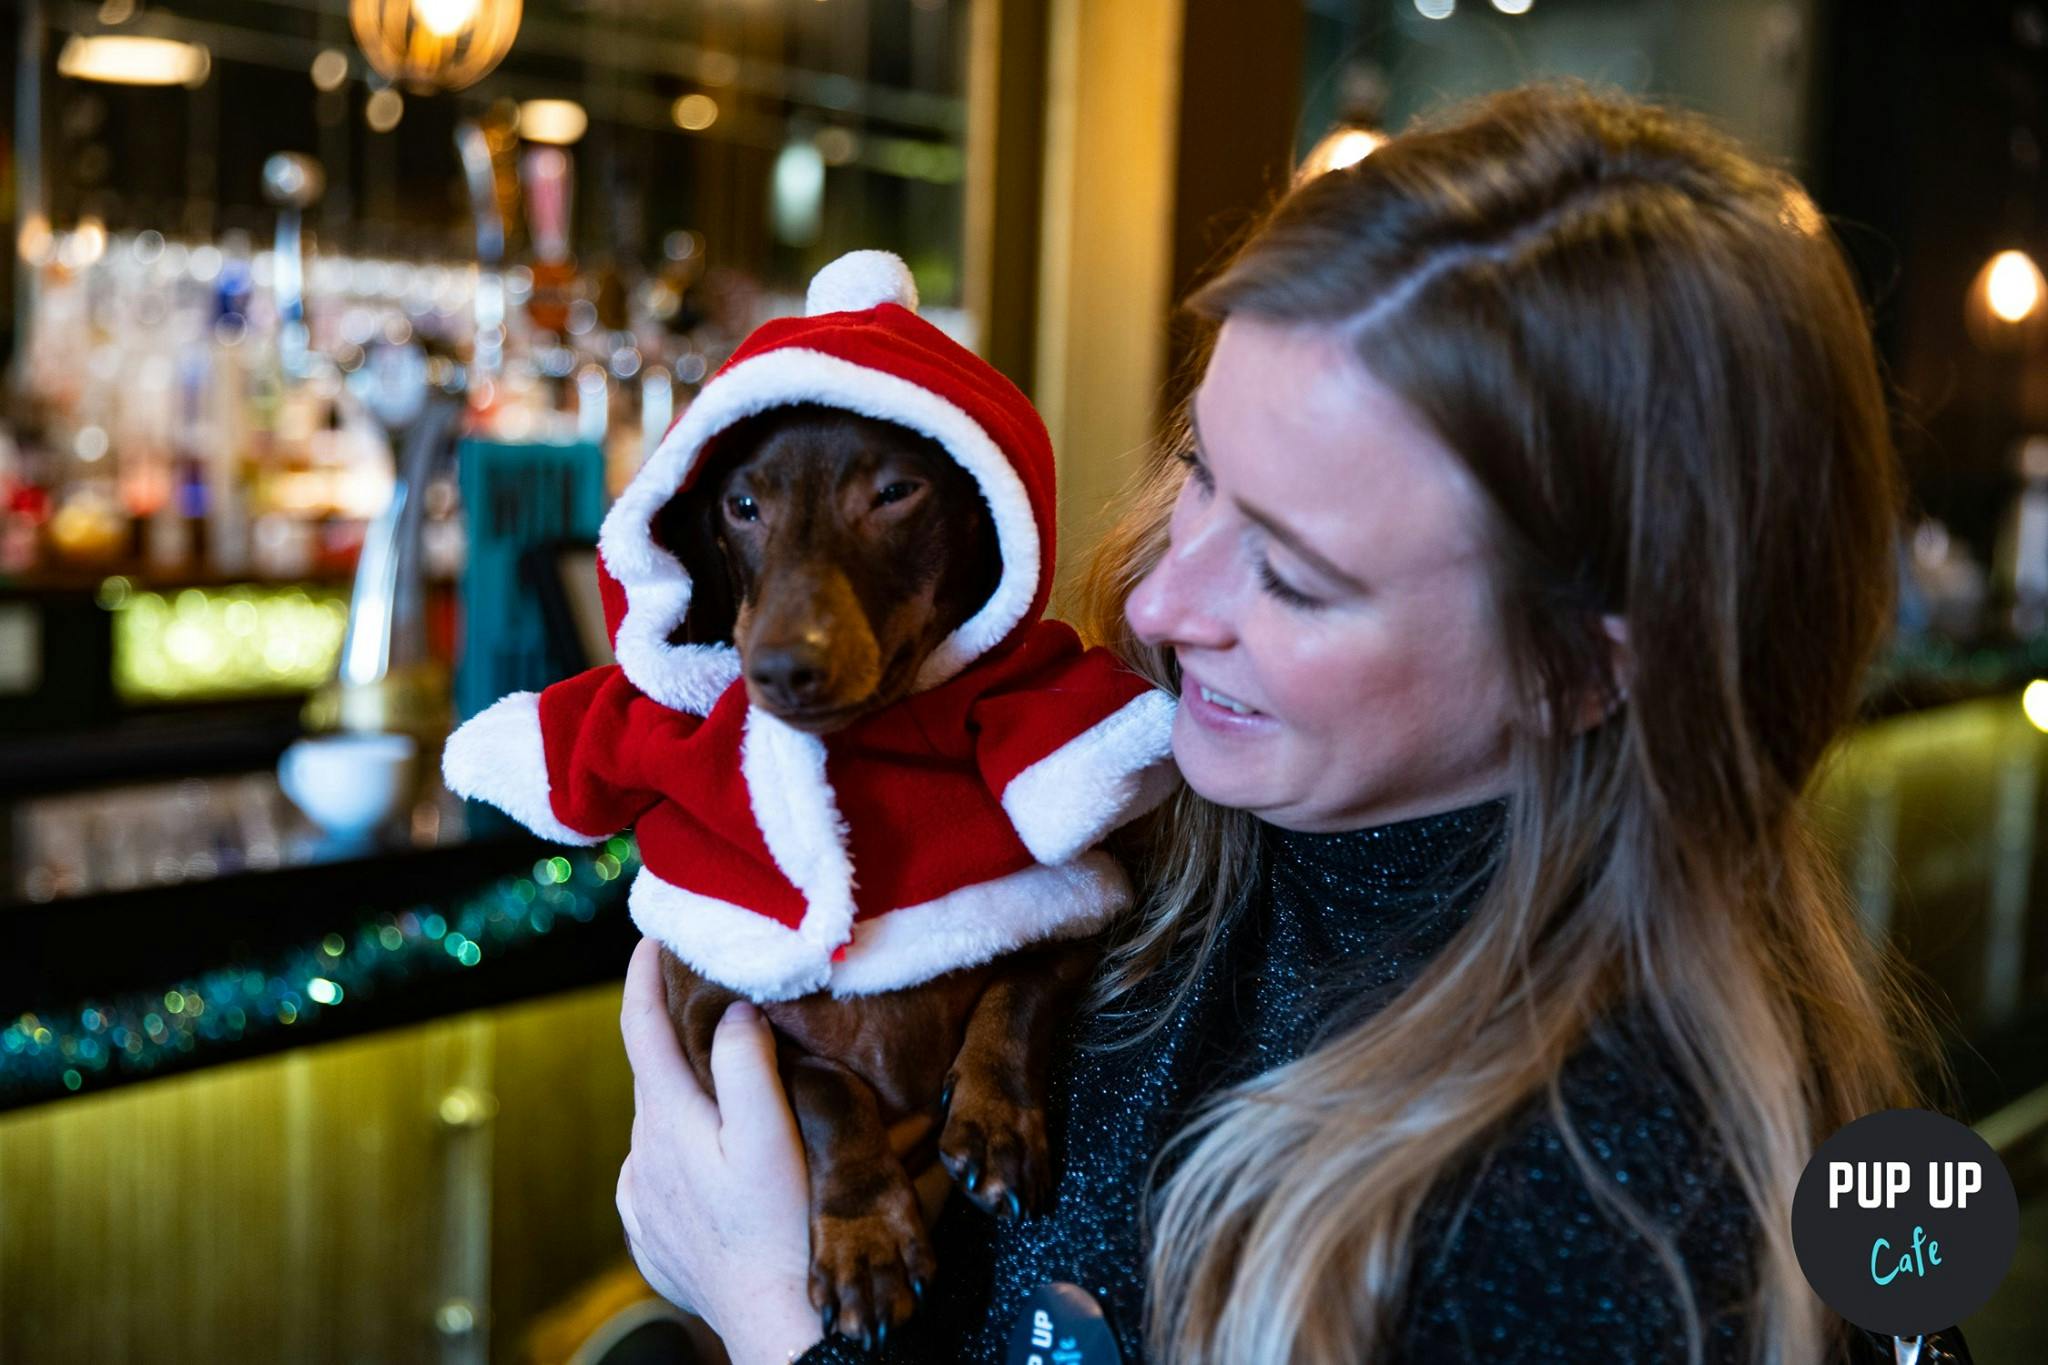 Dachshund Through The Snow: A Pup Up Dachshund Cafe Coming To Bermondsey